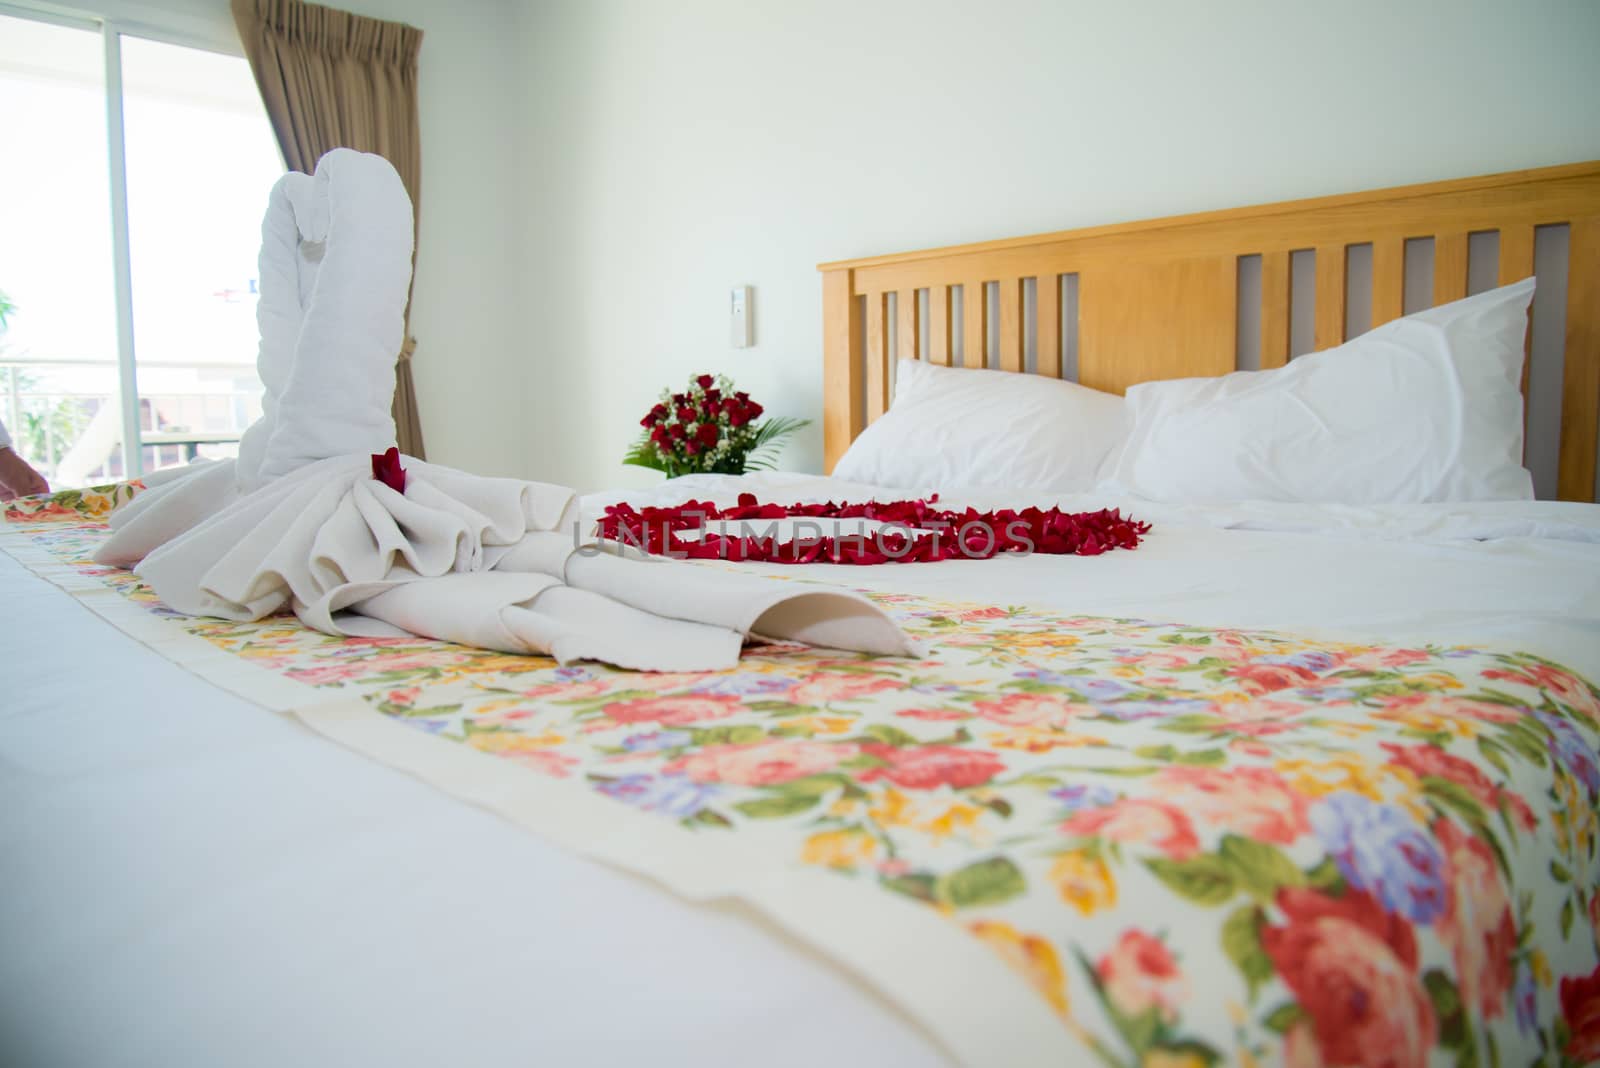 Roses placed on the the bed in wedding day. bridal house